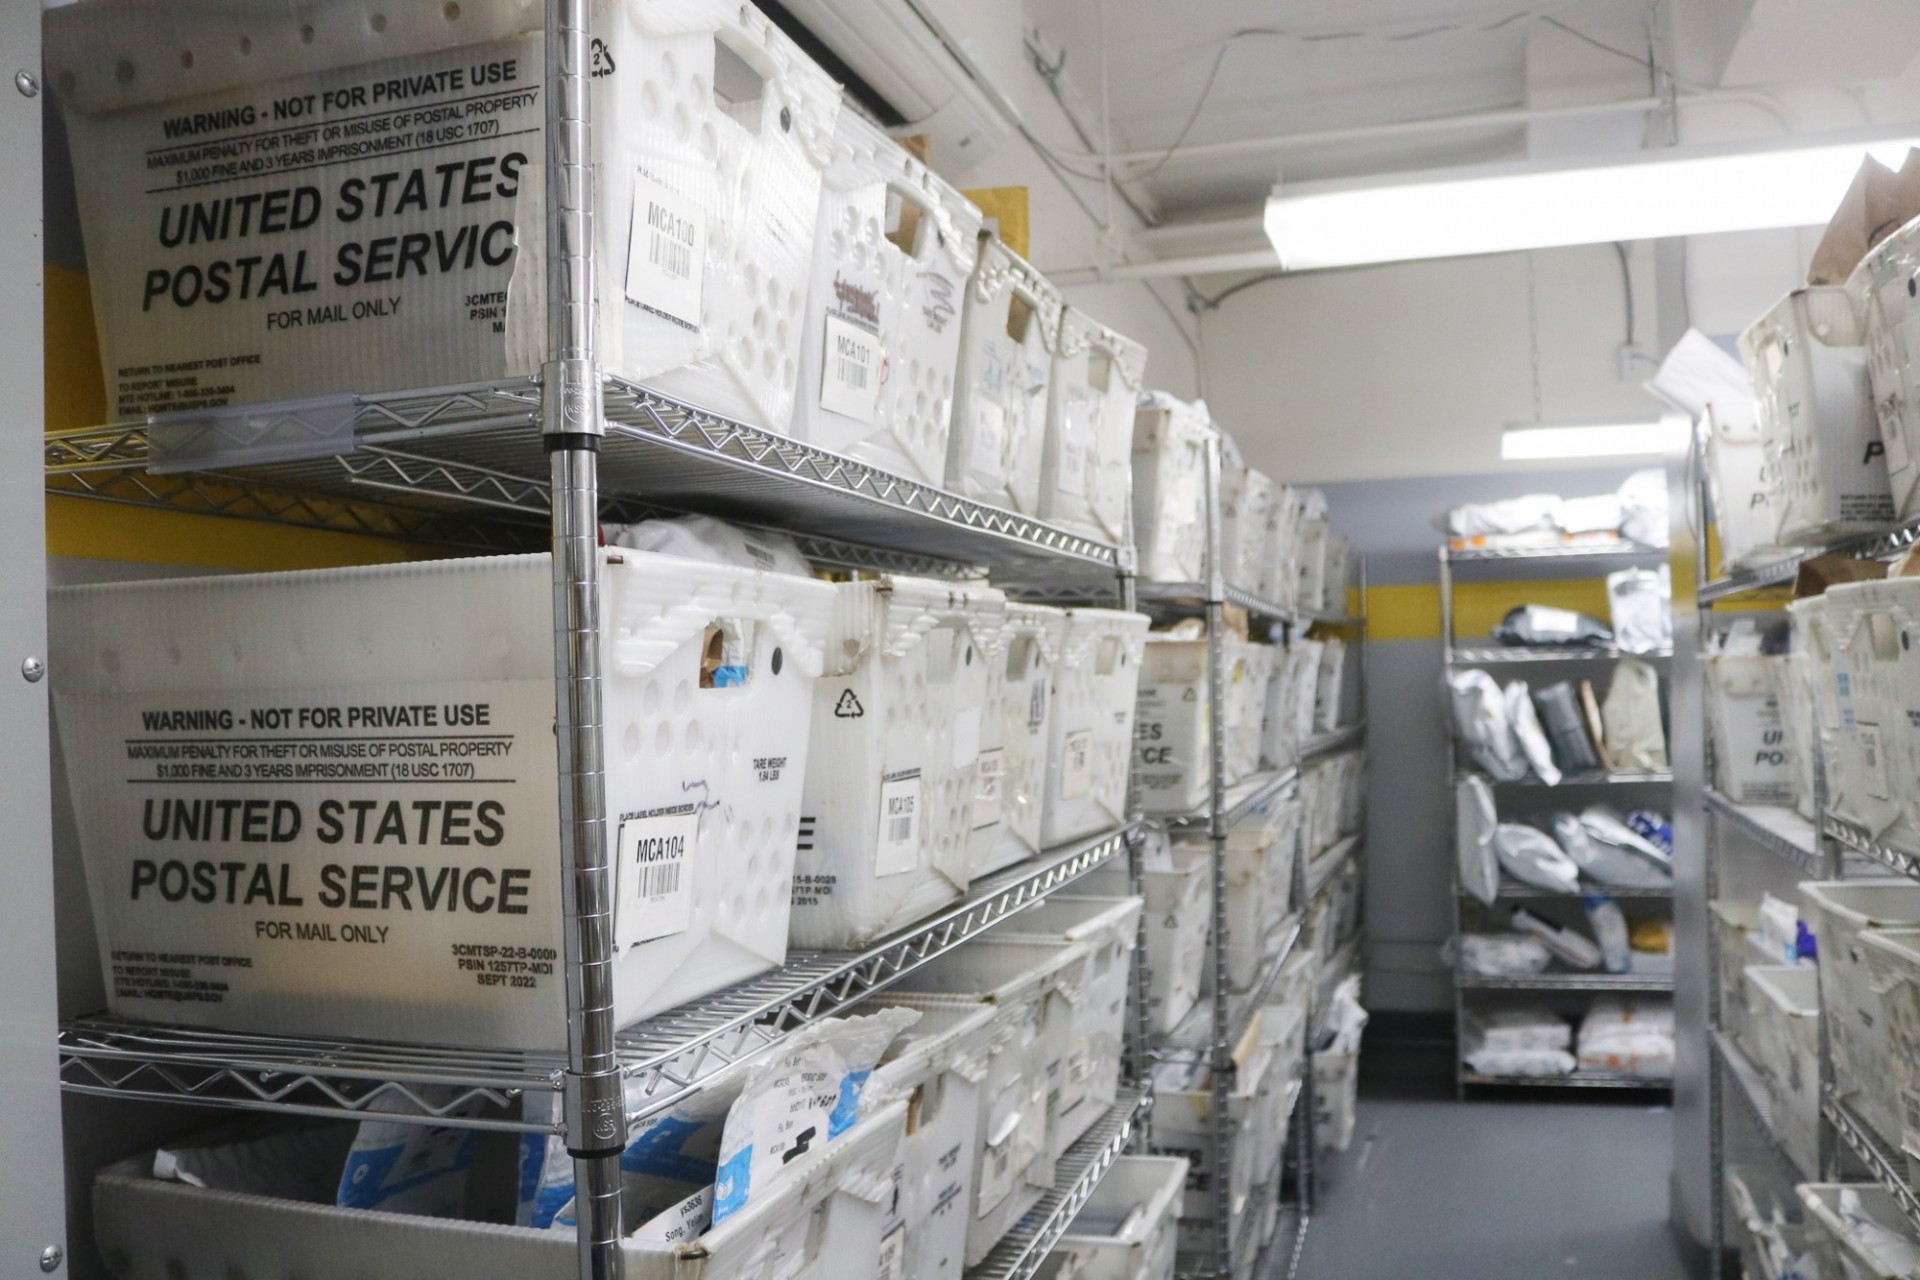 USPS bins of letters stacked in the Mail center